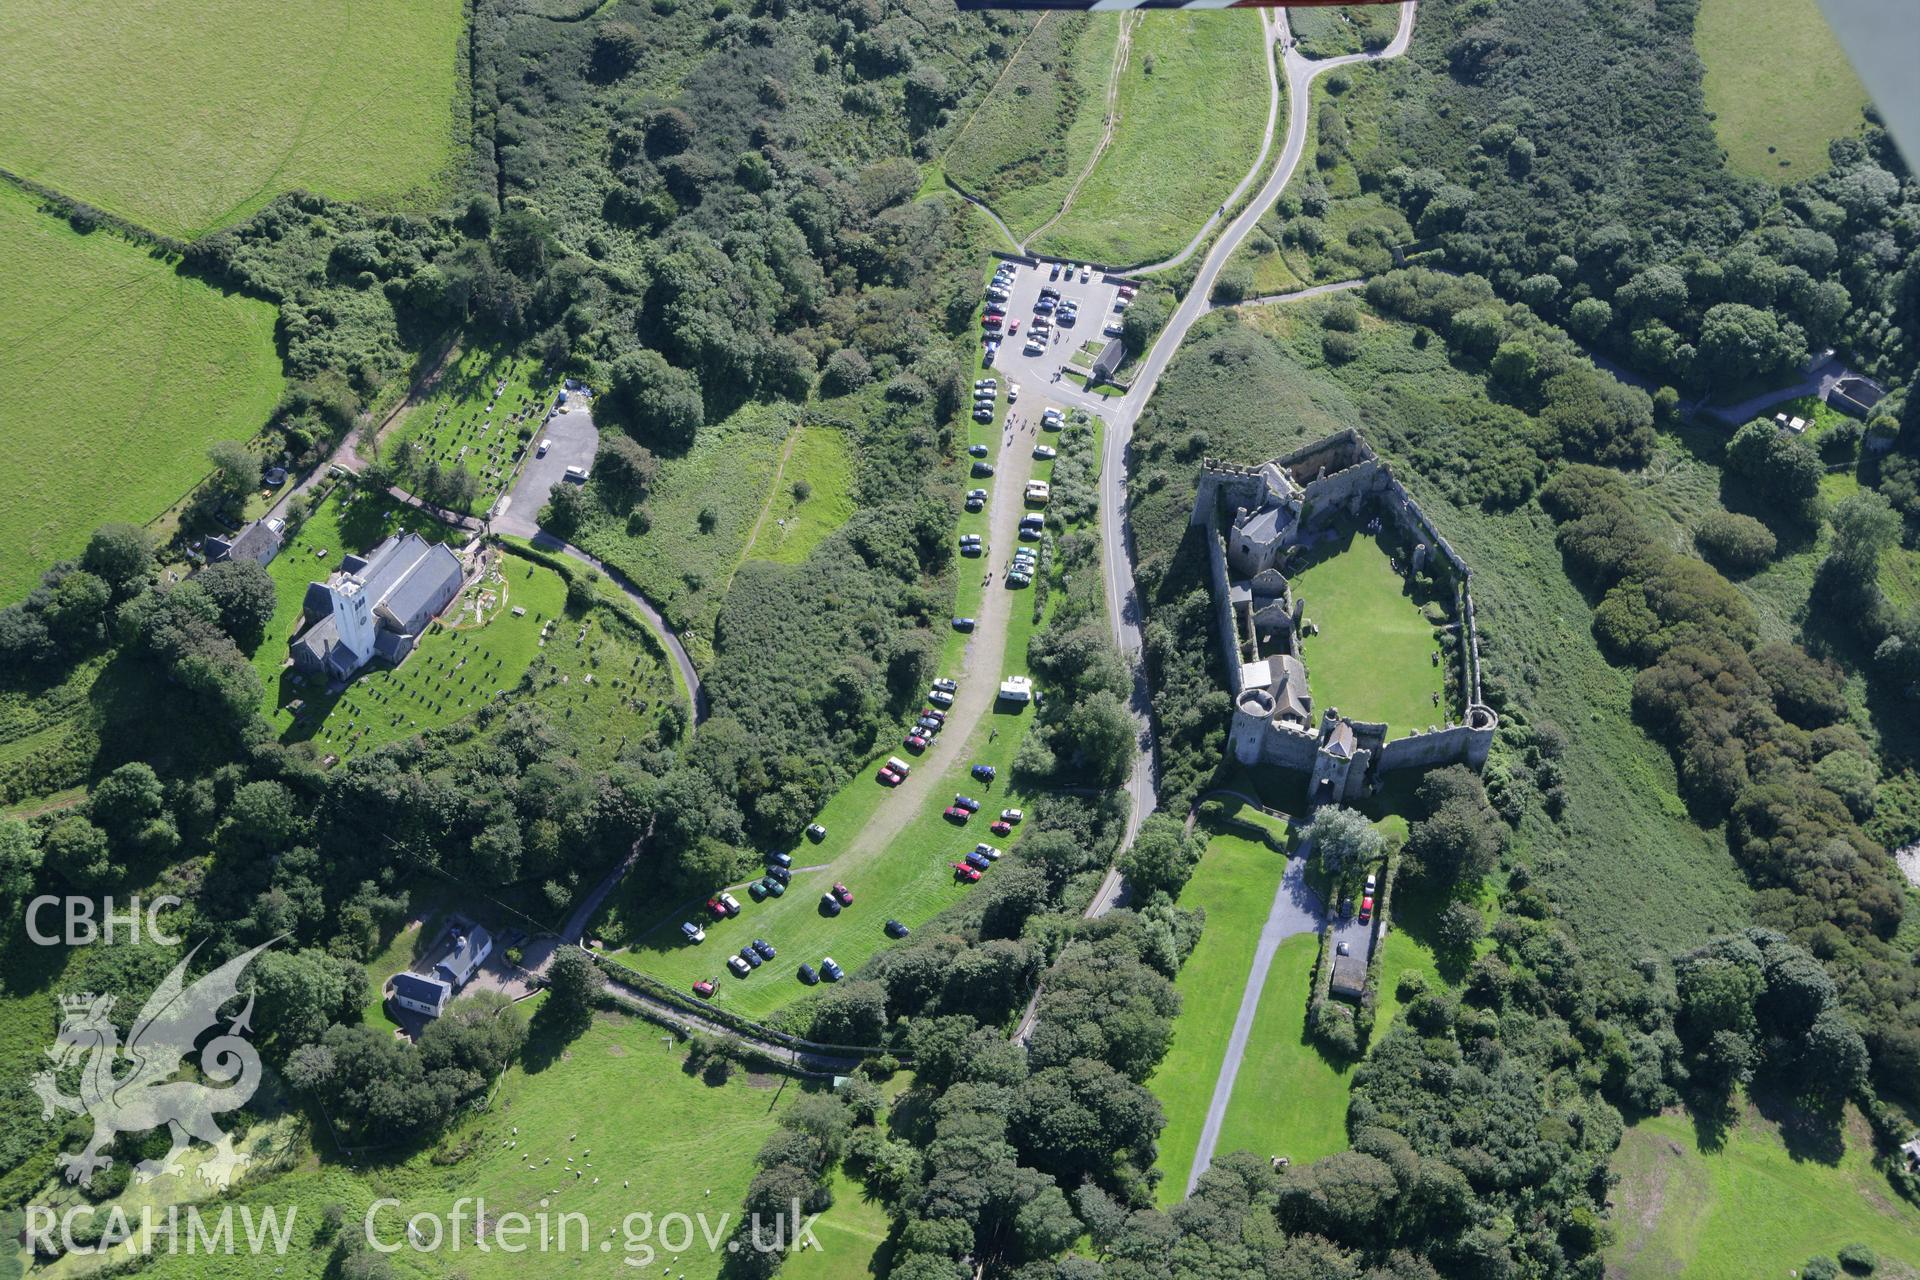 RCAHMW colour oblique aerial photograph of Manorbier Castle. Taken on 30 July 2007 by Toby Driver